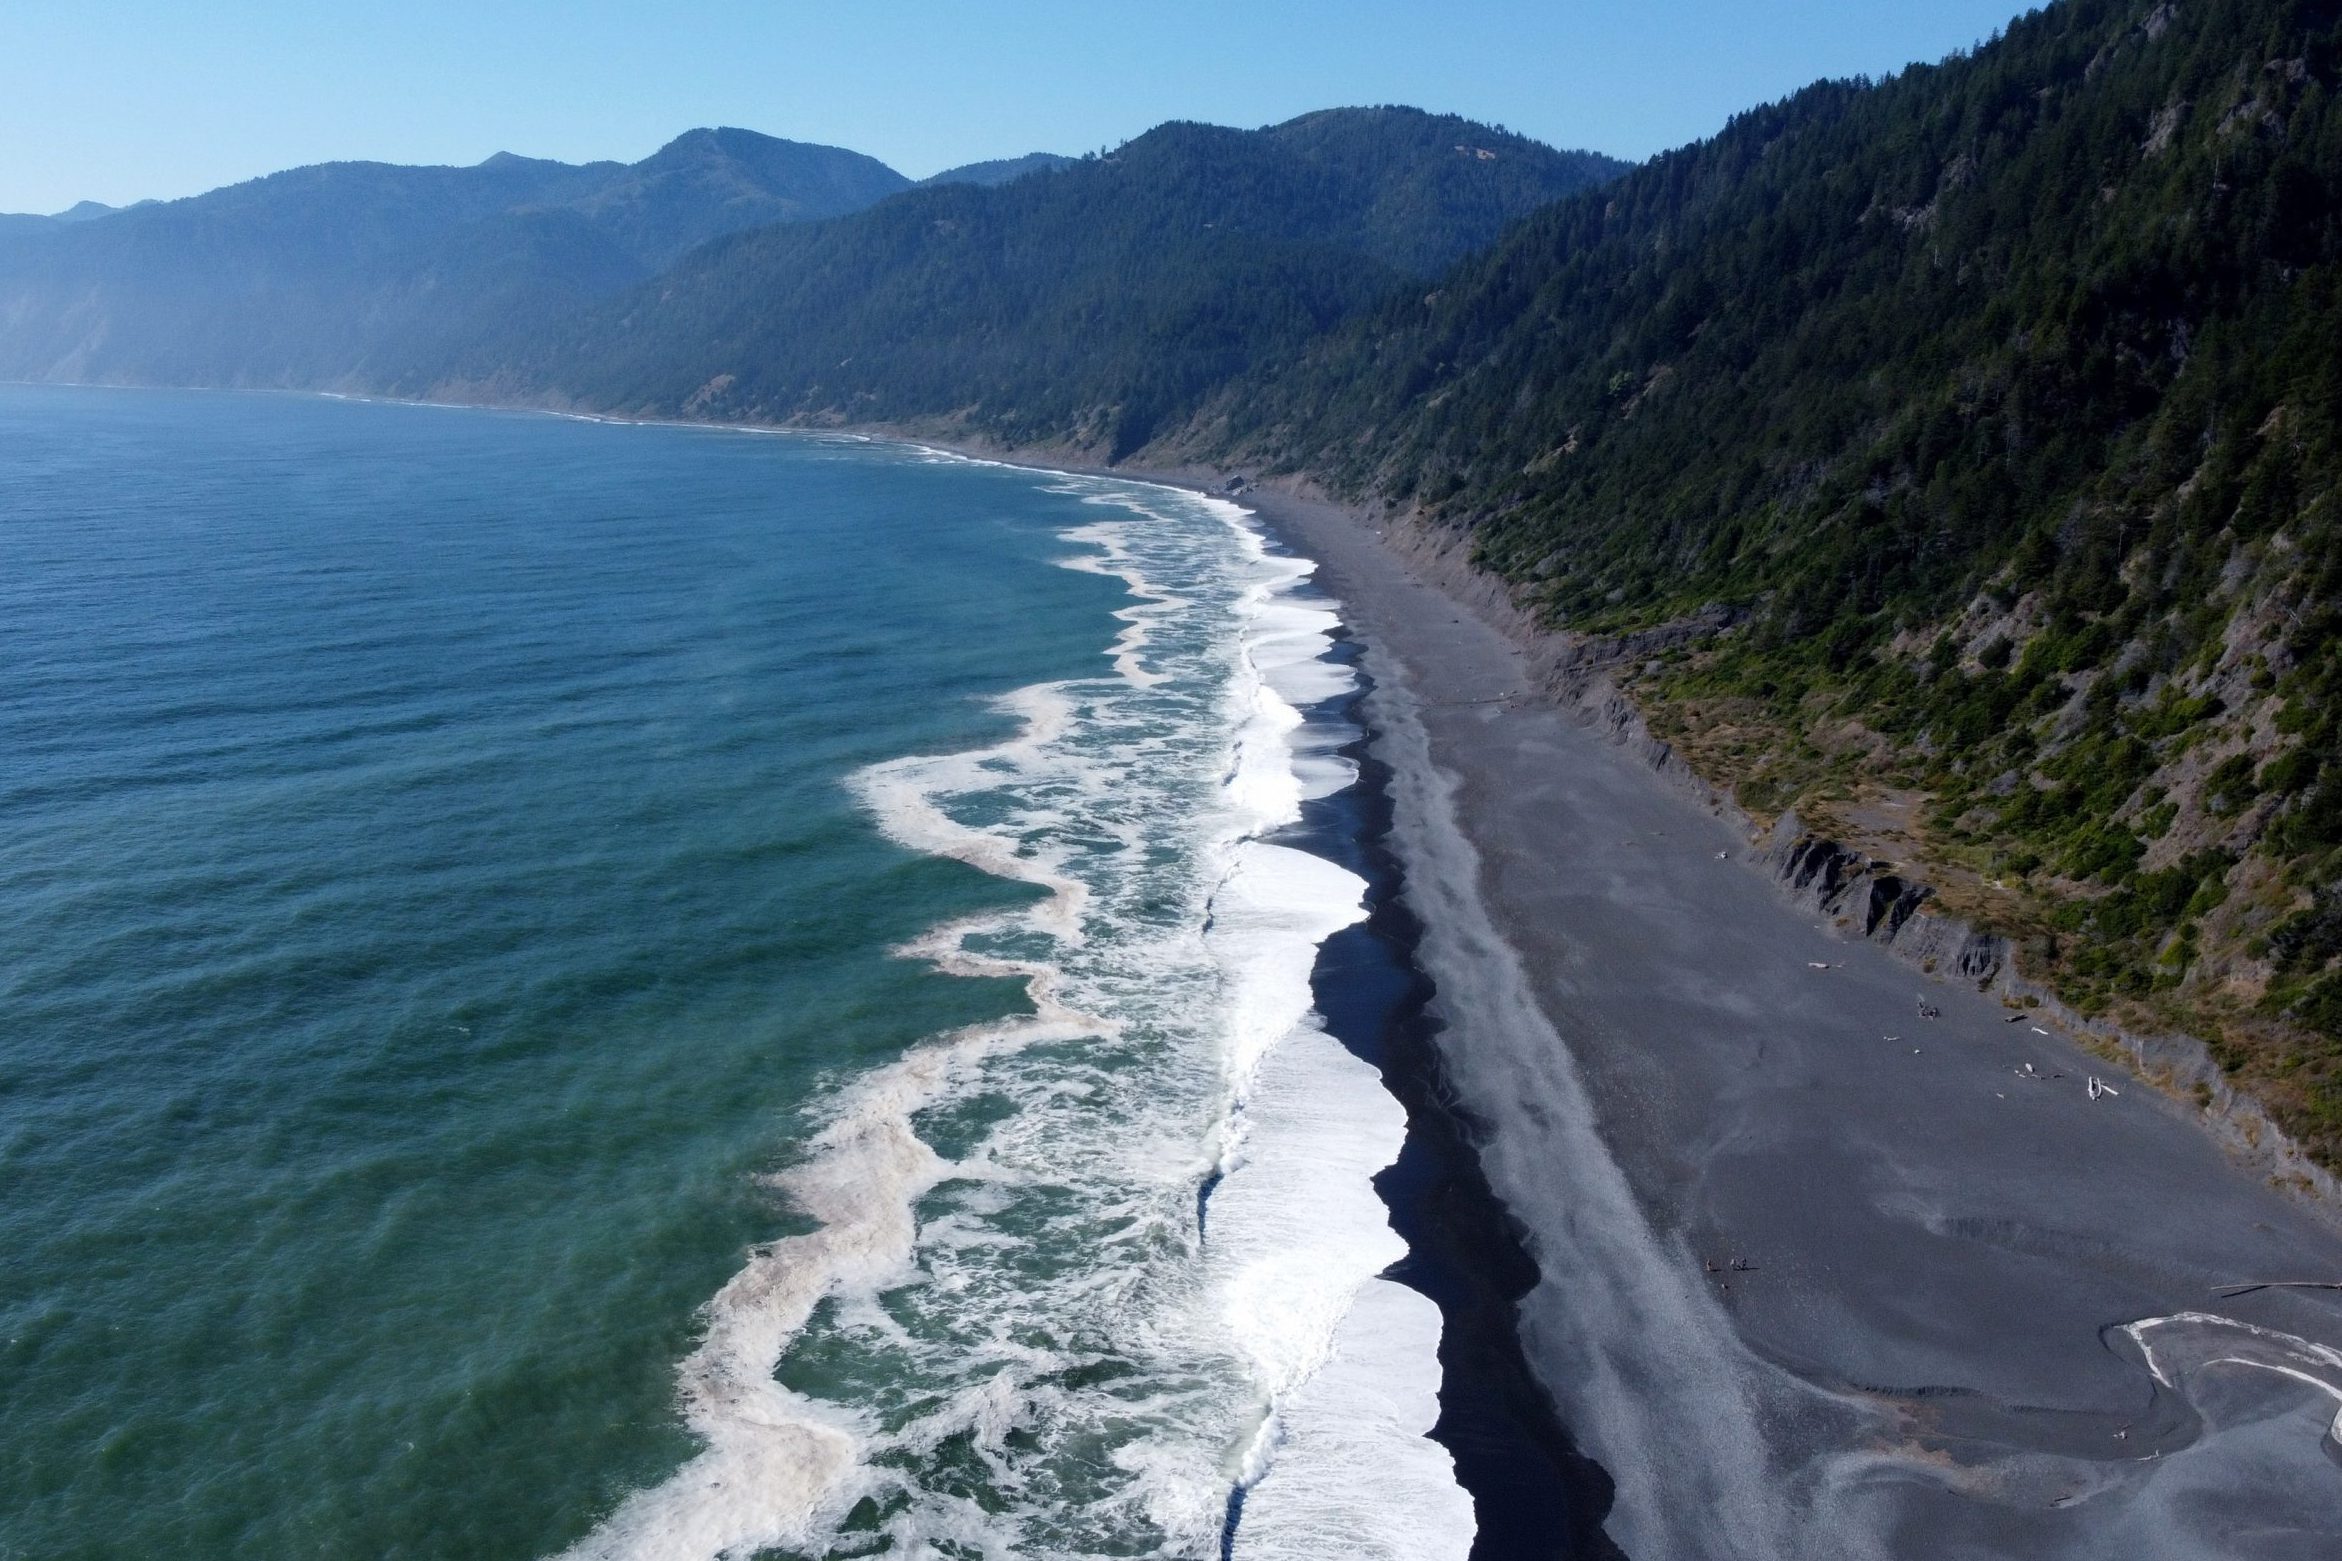 <p>Yes, the sand at this California beach is black—and it's considered one of the most beautiful black-sand beaches on the U.S. mainland. <a href="https://www.tripadvisor.com/Attraction_Review-g499619-d6674741-Reviews-Black_Sands_Beach-Shelter_Cove_Humboldt_County_California.html" rel="noopener">Black Sands Beach</a> is not ideal for swimming, since the waves are rough, but it's great for those who want to bird-watch at a less-crowded beach.</p> <p>Keep in mind that at high tide the beach will be narrow, so check tide charts before you go. Oh, and also, CaliforniaBeaches.com notes that some locals consider this a clothing-optional beach (consider this your warning!). Check out these other <a href="https://www.rd.com/list/black-sand-beaches/">black-sand beaches</a> you never knew existed.</p> <p class="listicle-page__cta-button-shop"><a class="shop-btn" href="https://www.tripadvisor.com/Attraction_Review-g499619-d6674741-Reviews-Black_Sands_Beach-Shelter_Cove_Humboldt_County_California.html">Learn More</a></p>